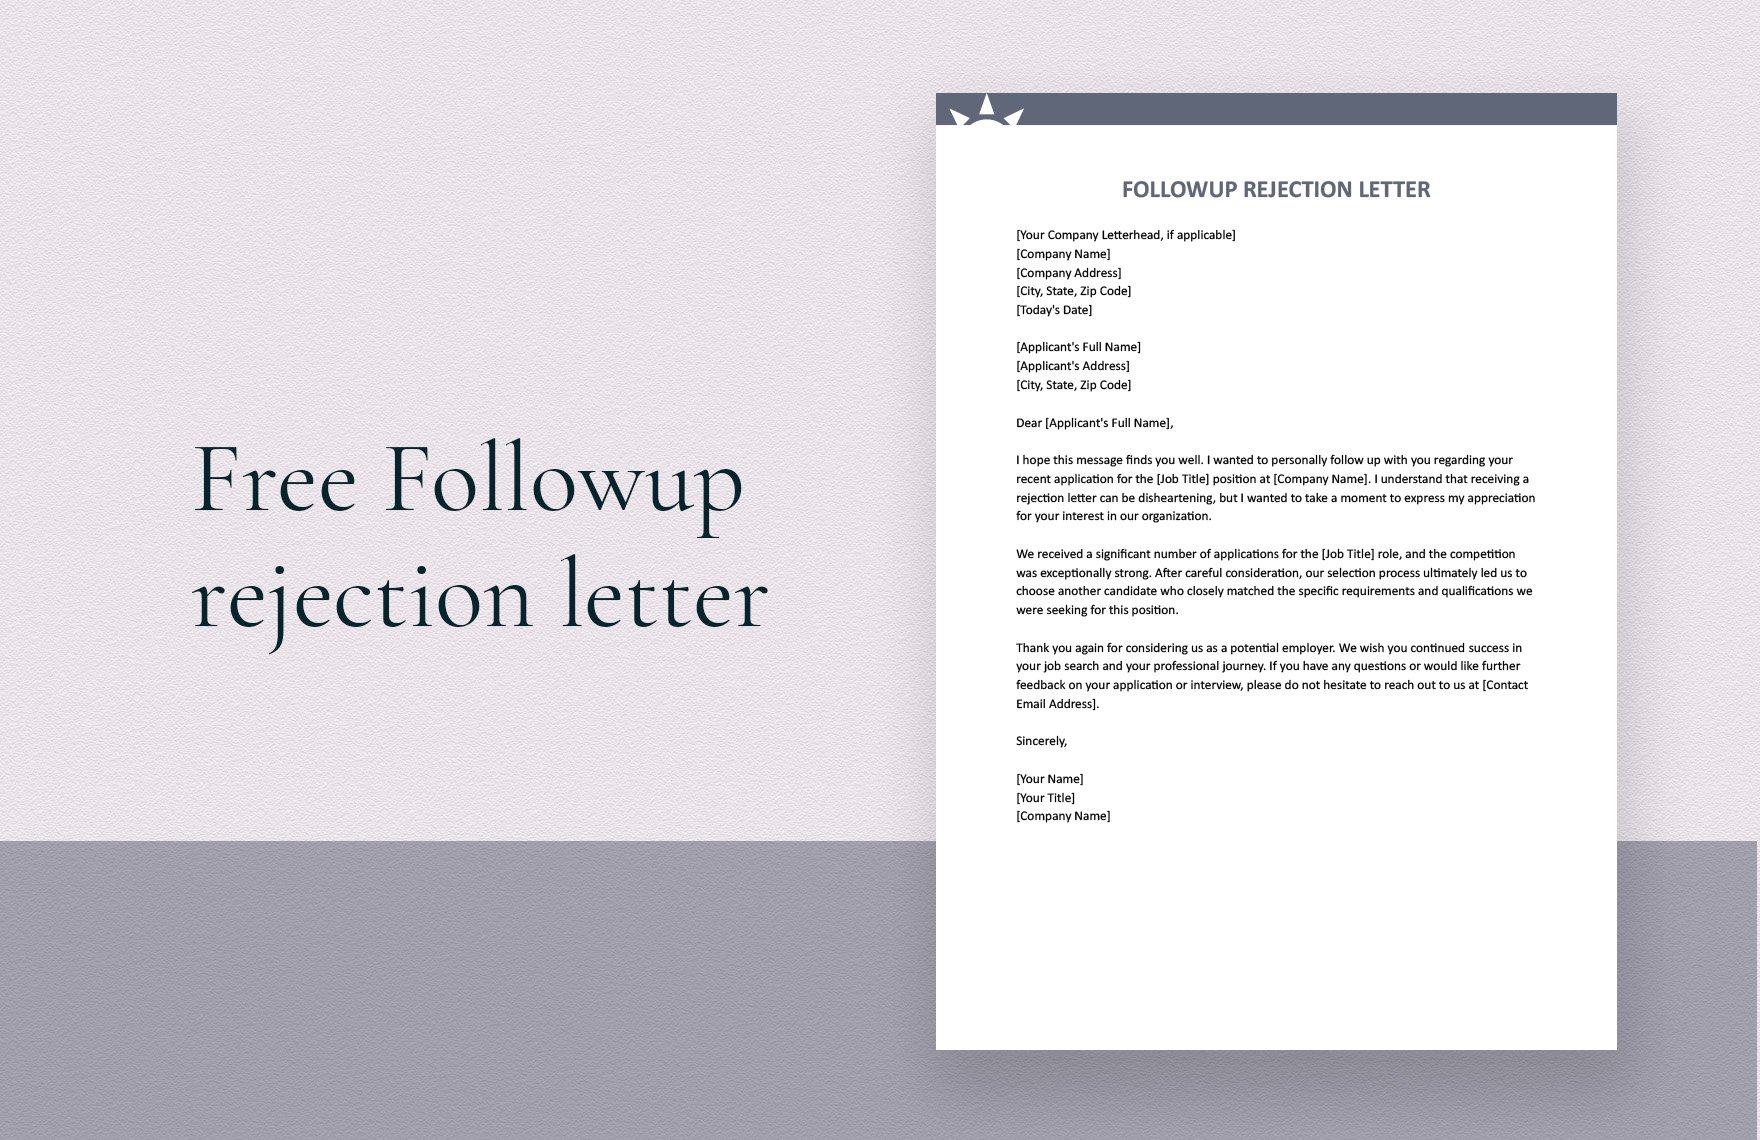 Followup Rejection Letter in Word, Google Docs